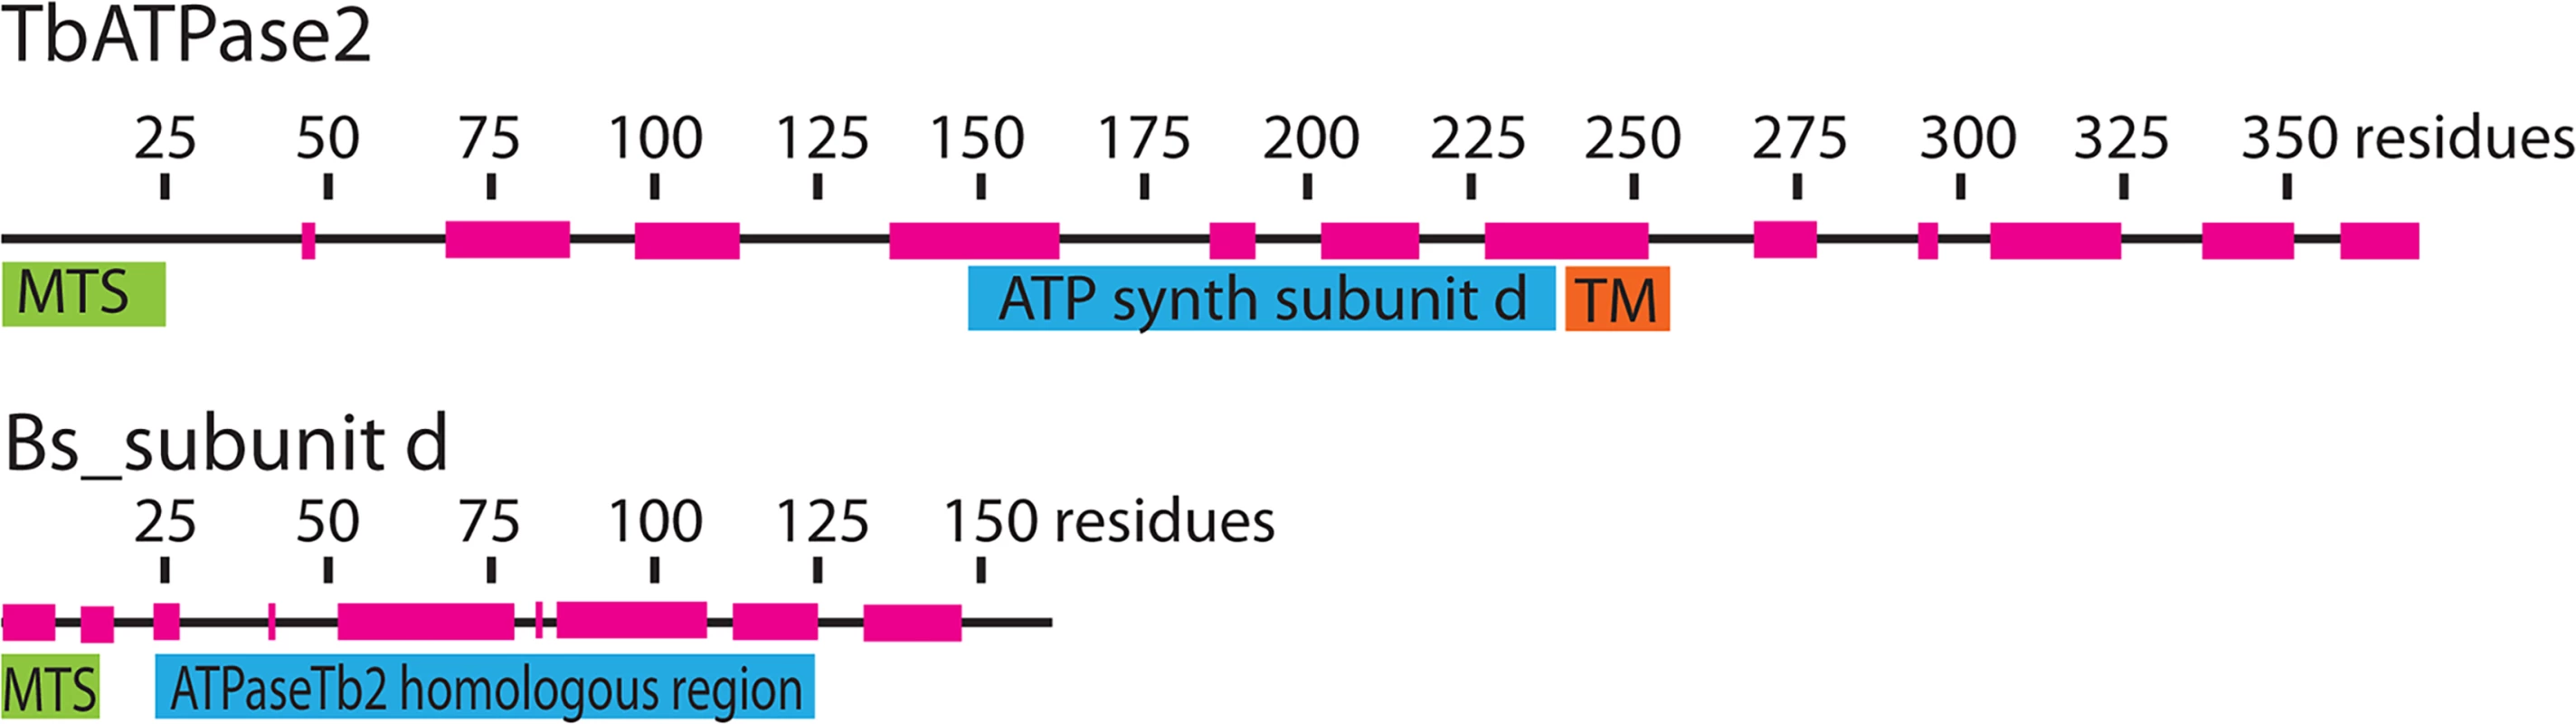 Bioinformatics reveal that ATPaseTb2 possesses a region of low homology to ATPase subunit d.